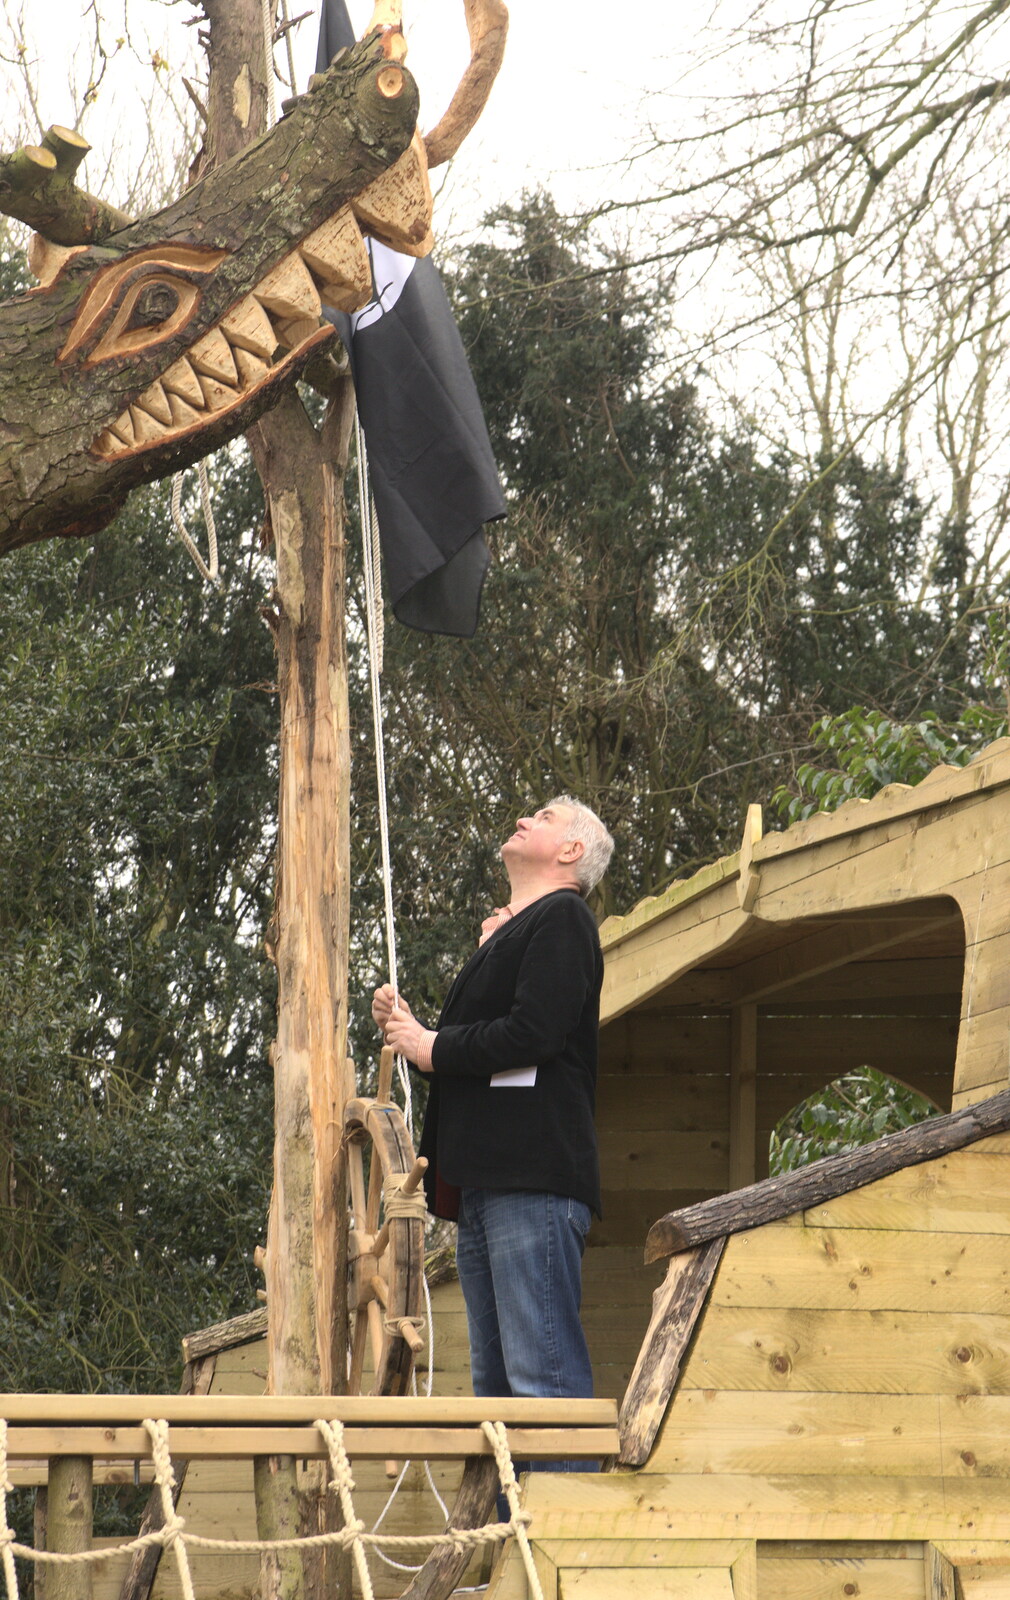 Frazer hoists the pirate flag from The Launching of the Jolly Conkerer, The Oaksmere, Brome, Suffolk - 3rd April 2015